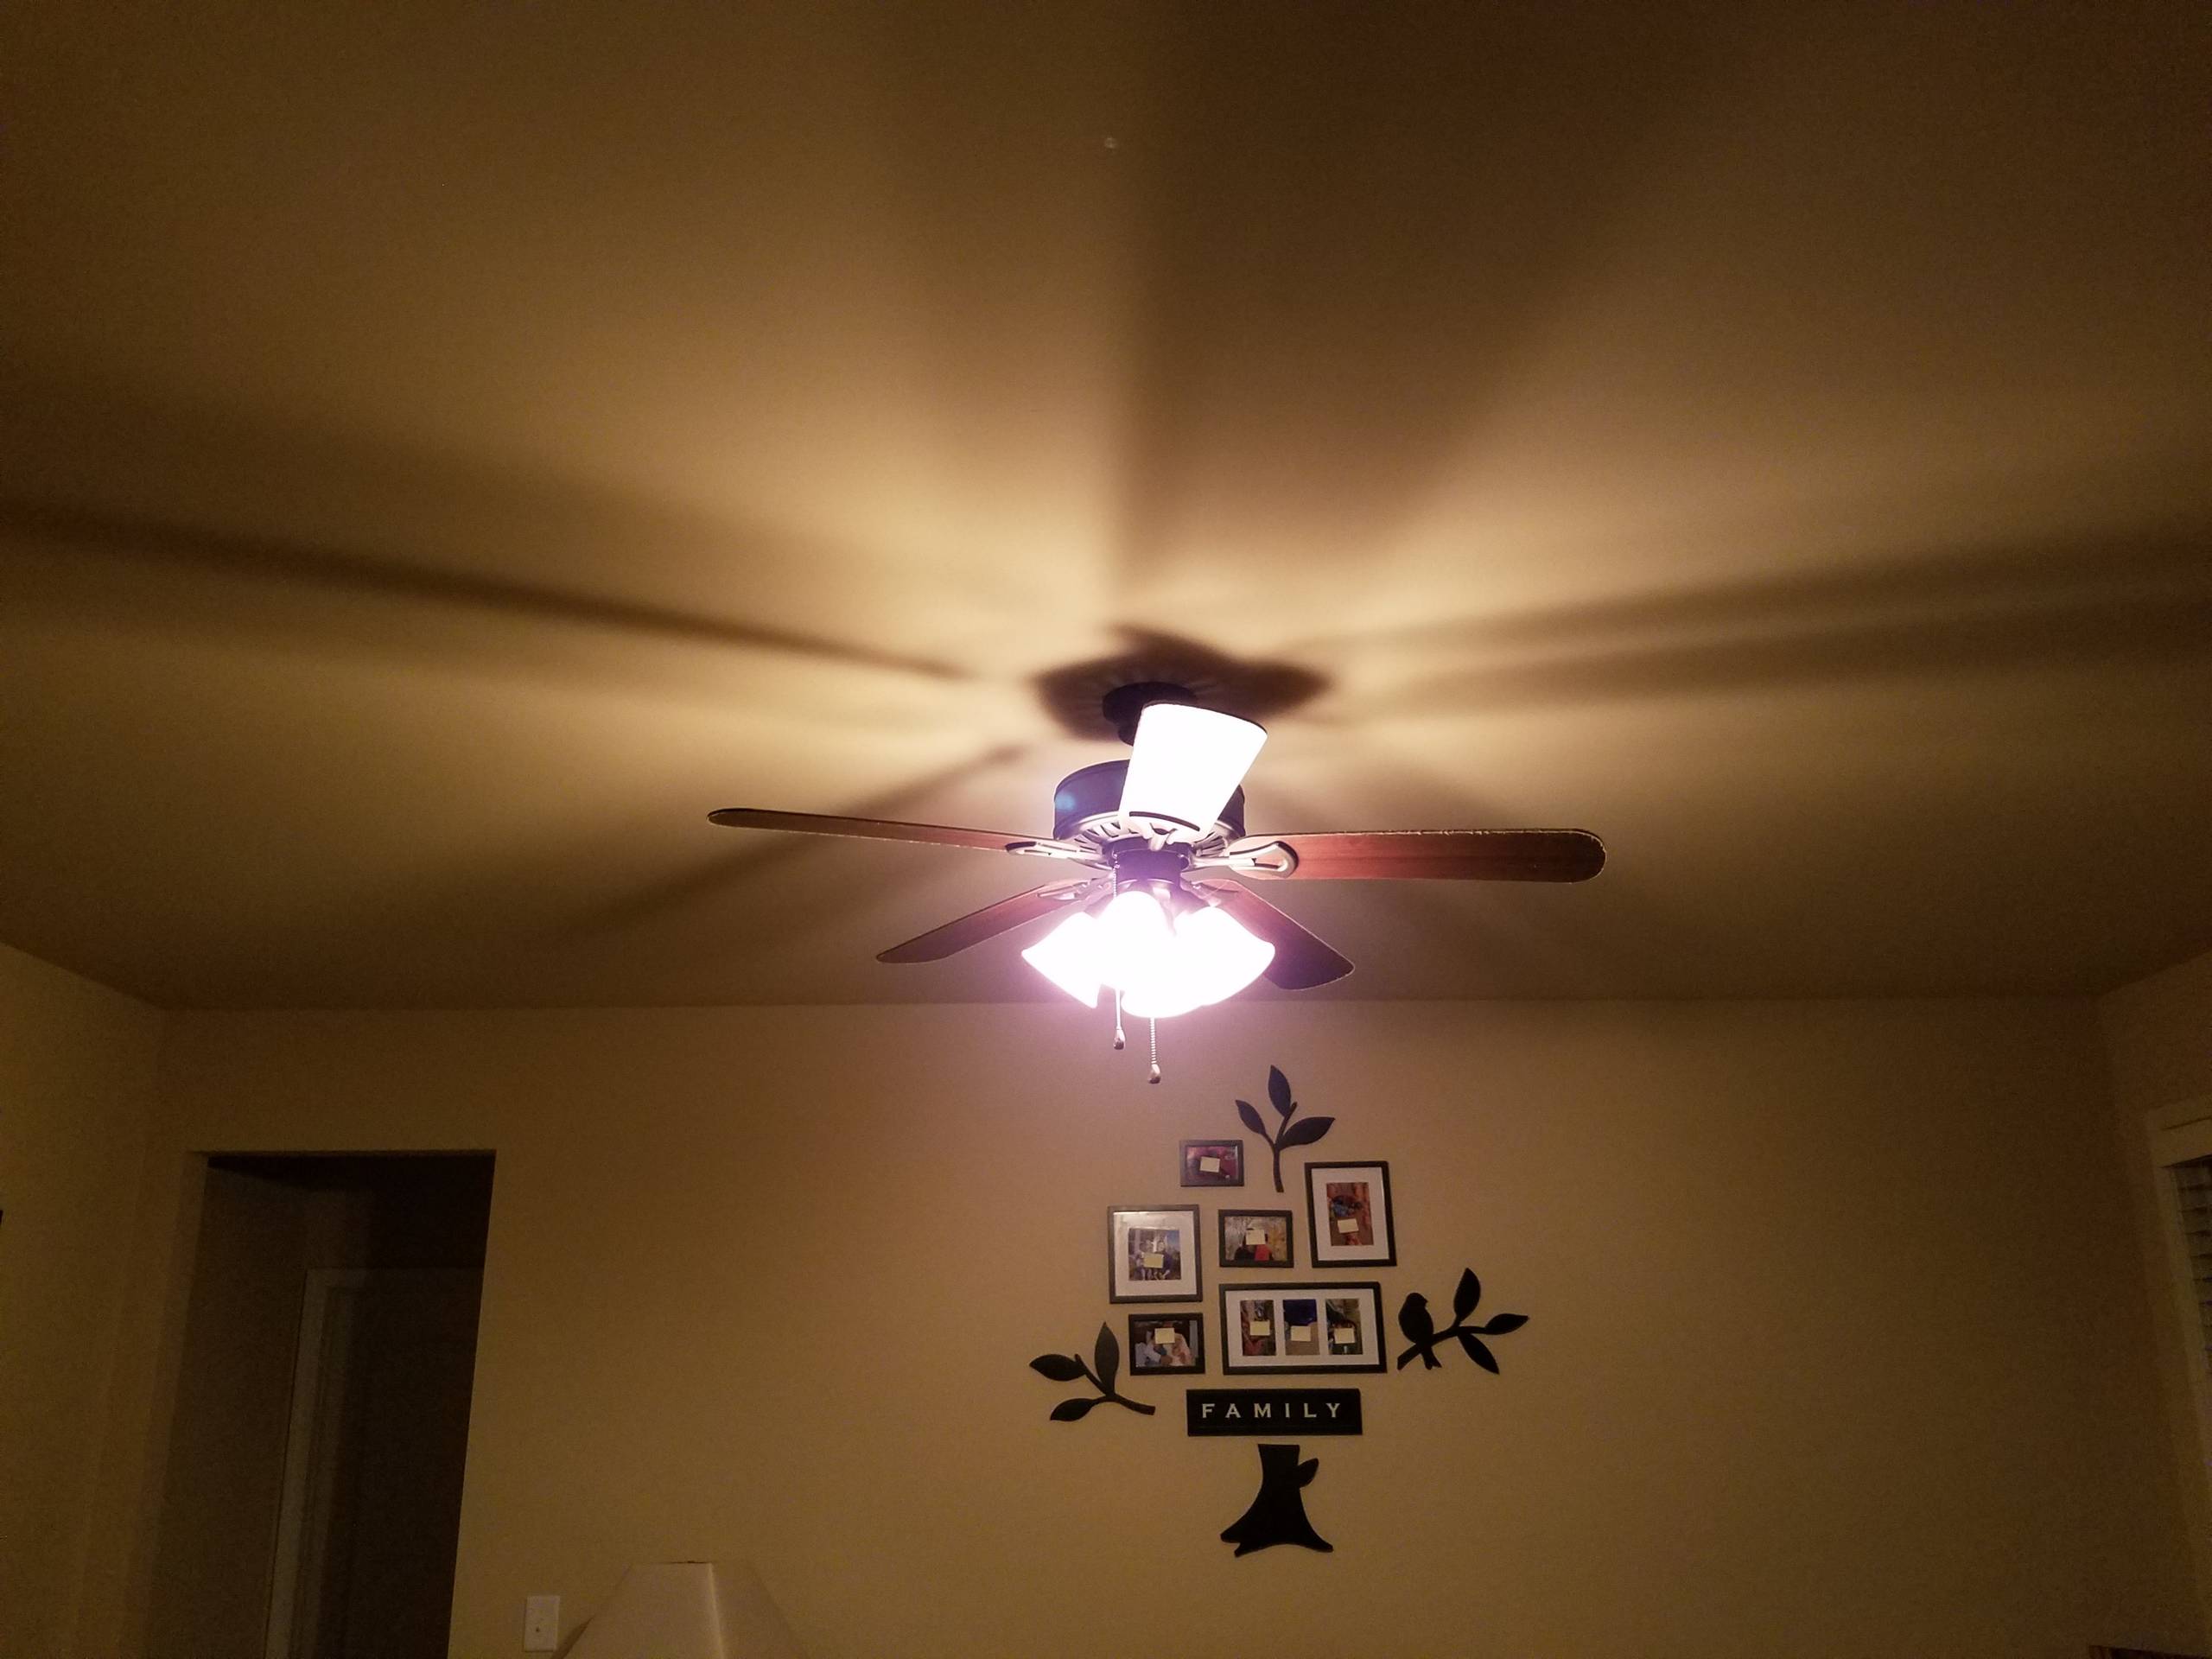 Light and ceiling fan installation